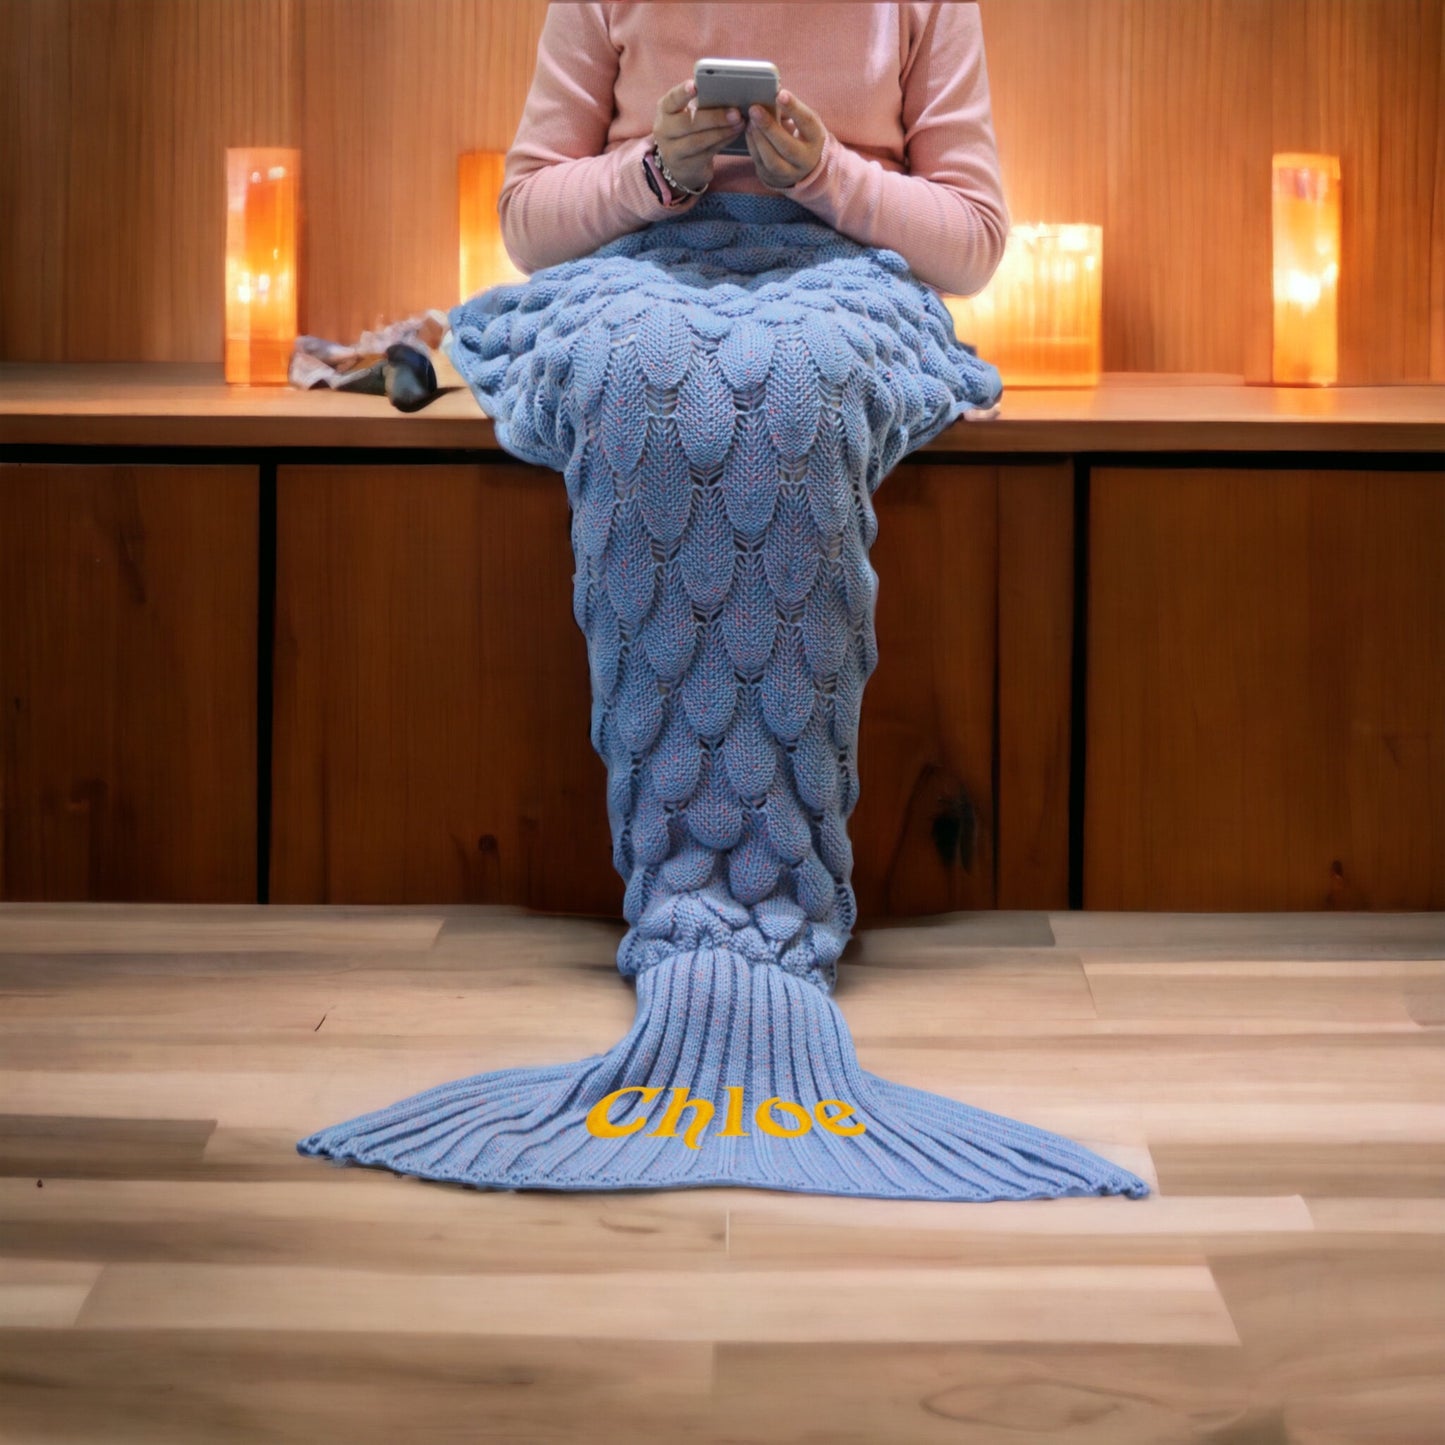 Personalized Mermaid Tail Shape Blanket - Ocean Blue" Description: "Close-up of a cozy mermaid tail blanket in a beautiful ocean blue color, ready to be personalized with a name."